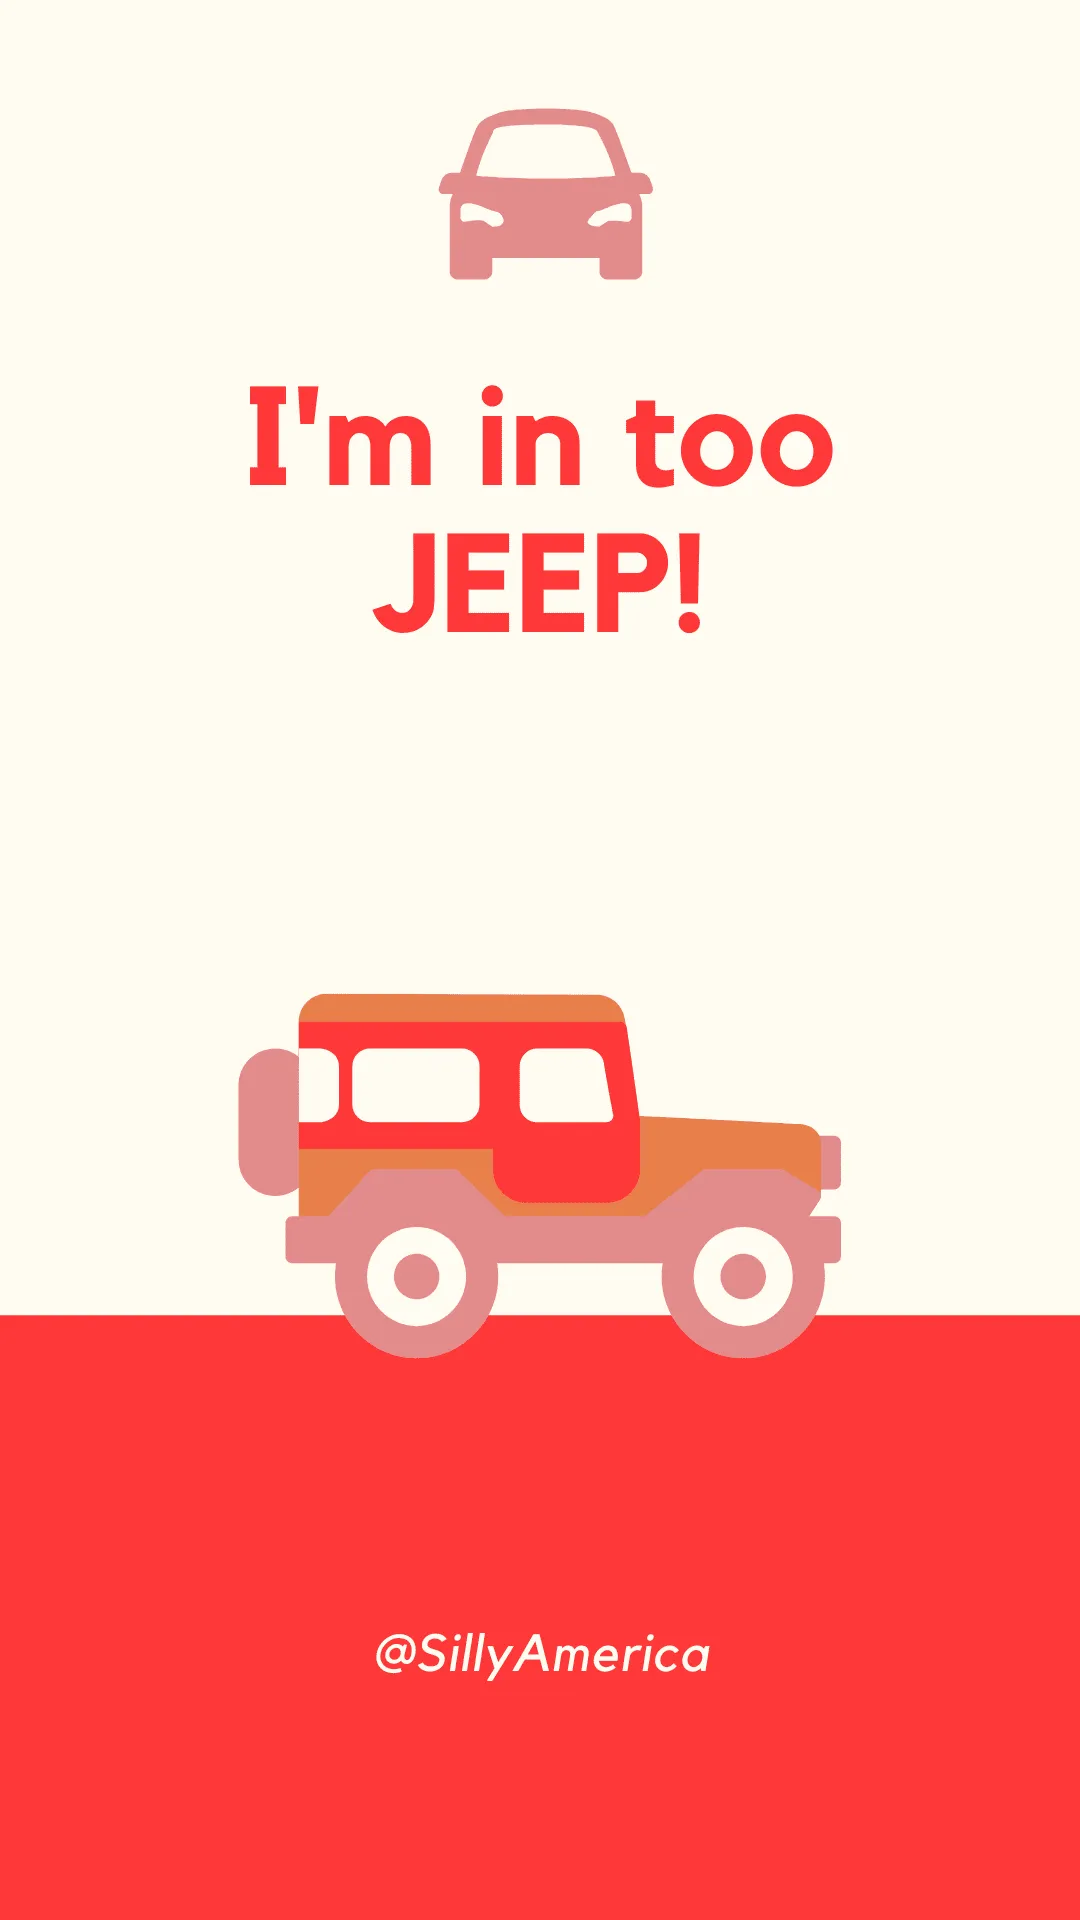 I'm in too JEEP! - Car Puns to fuel your road trip content!